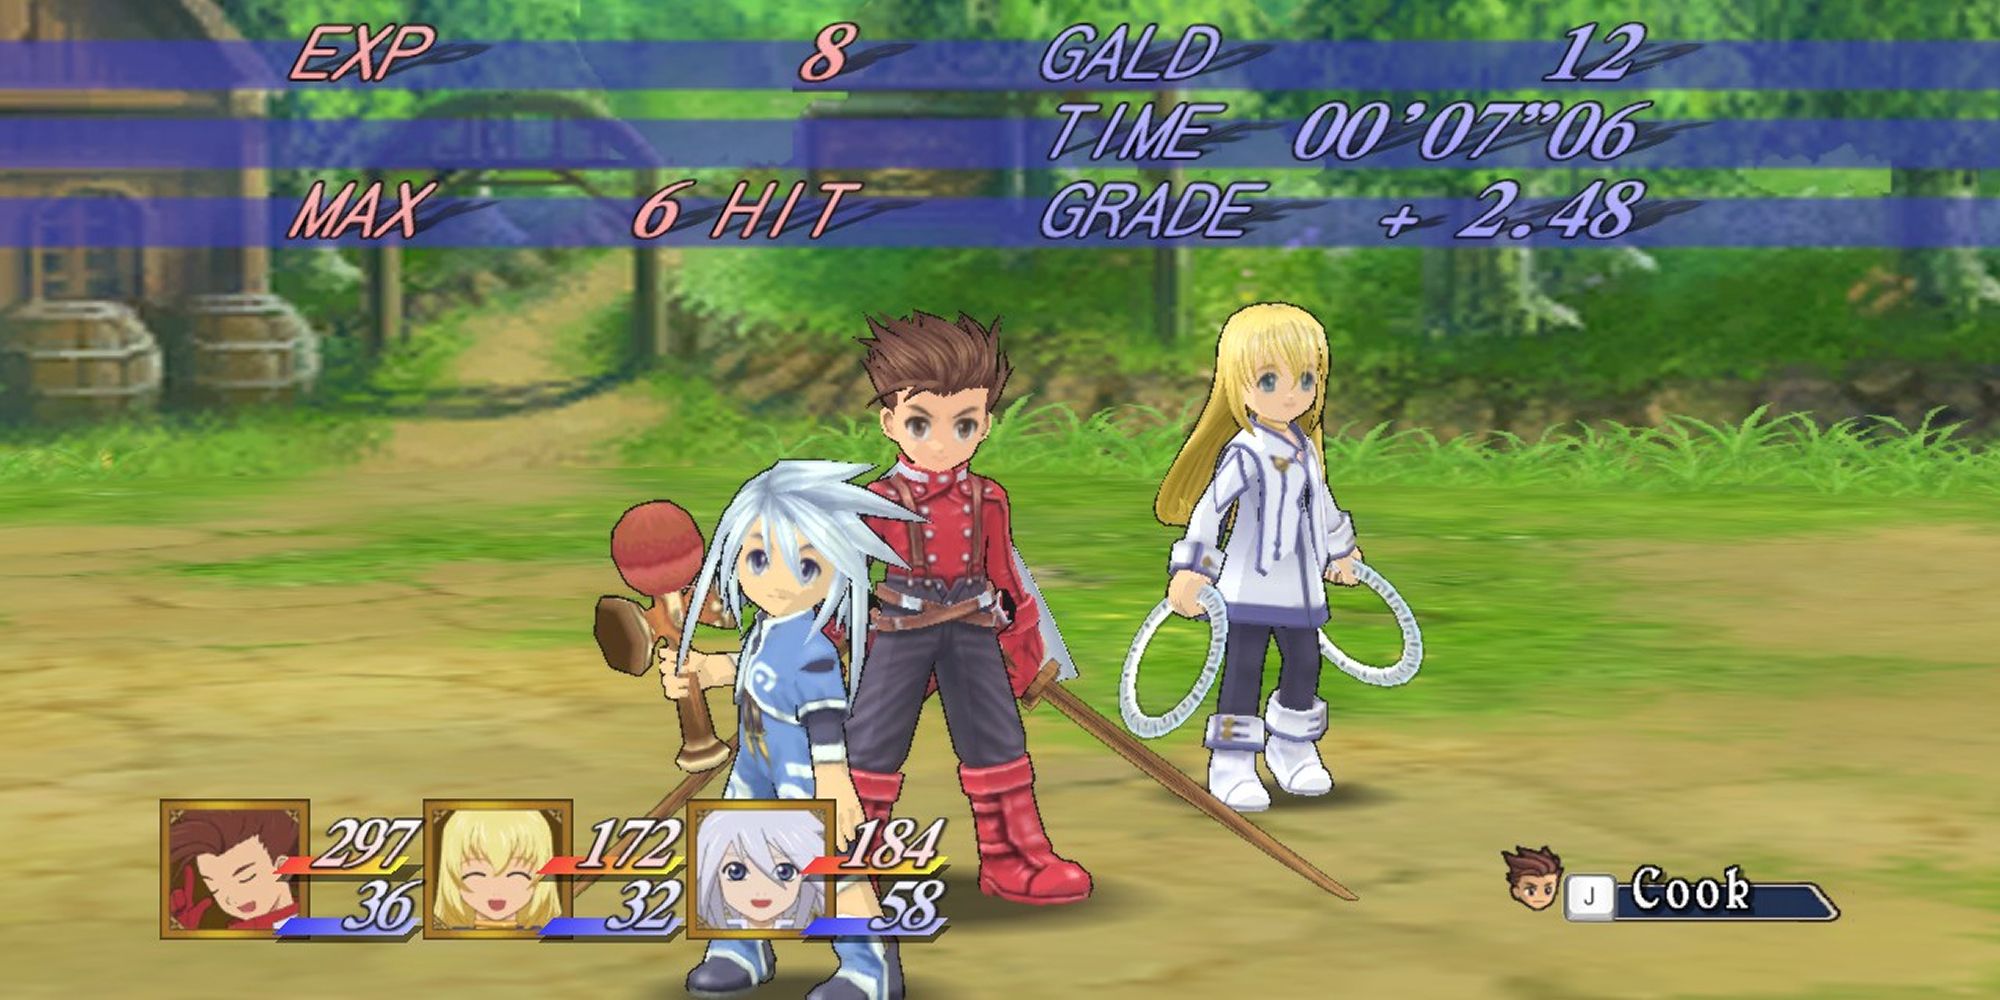 End Of Battle Grade Screen in Tales Of Symphonia.